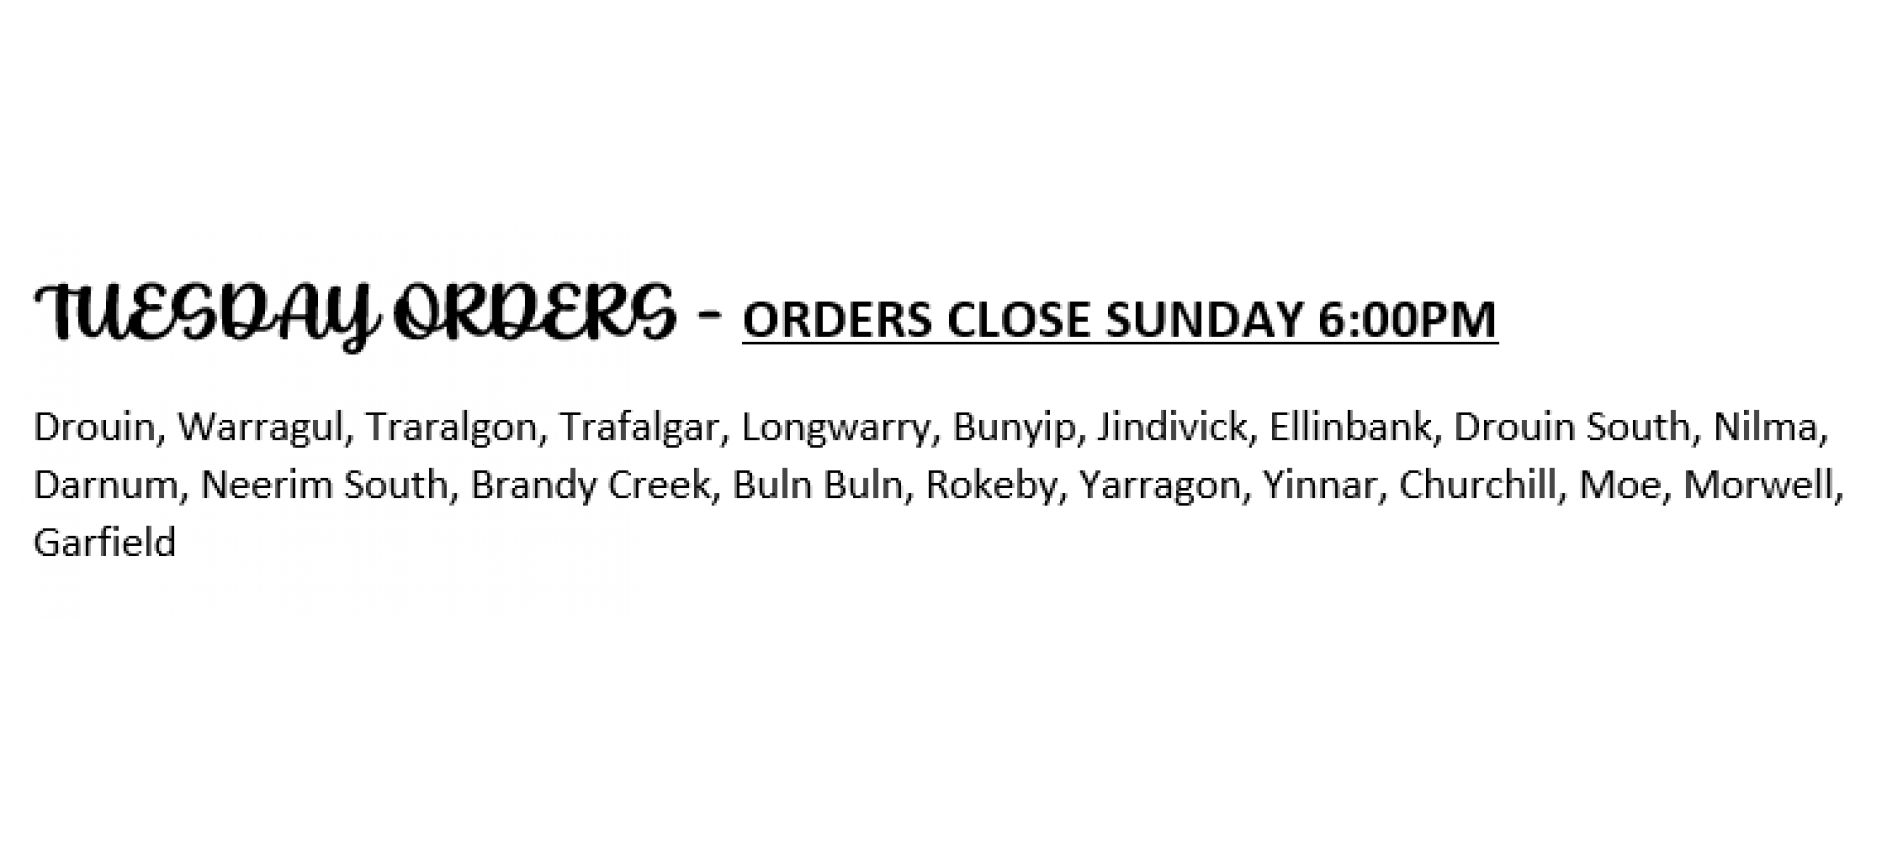 Tuesday orders